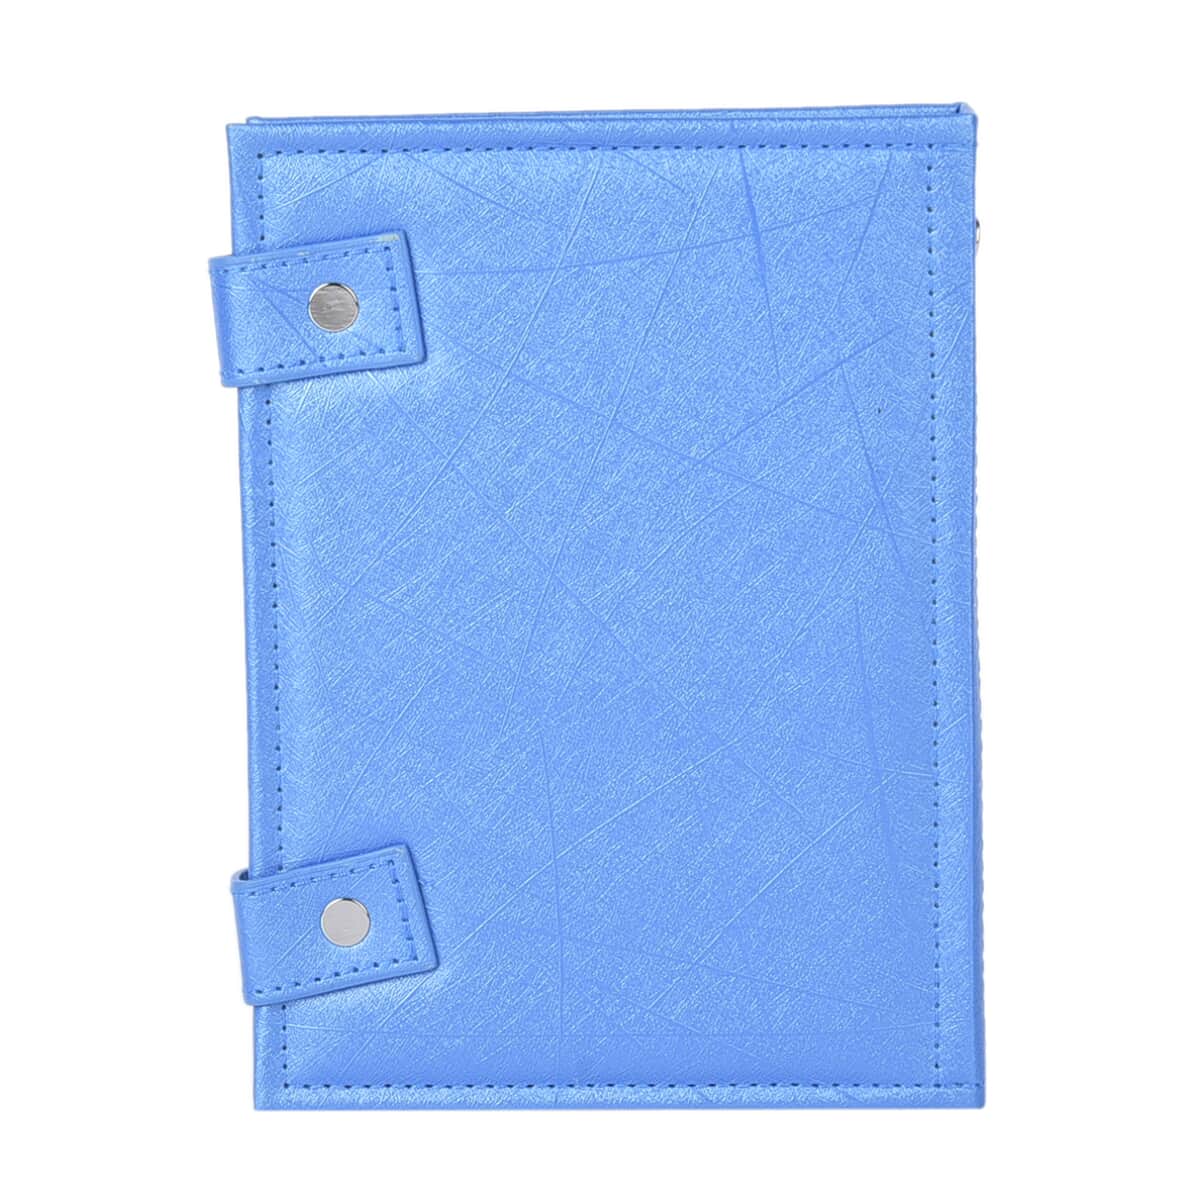 Blue Faux Leather 4 Page Book Design Earrings Hoder (7.28"x5.31"x1.57") image number 4